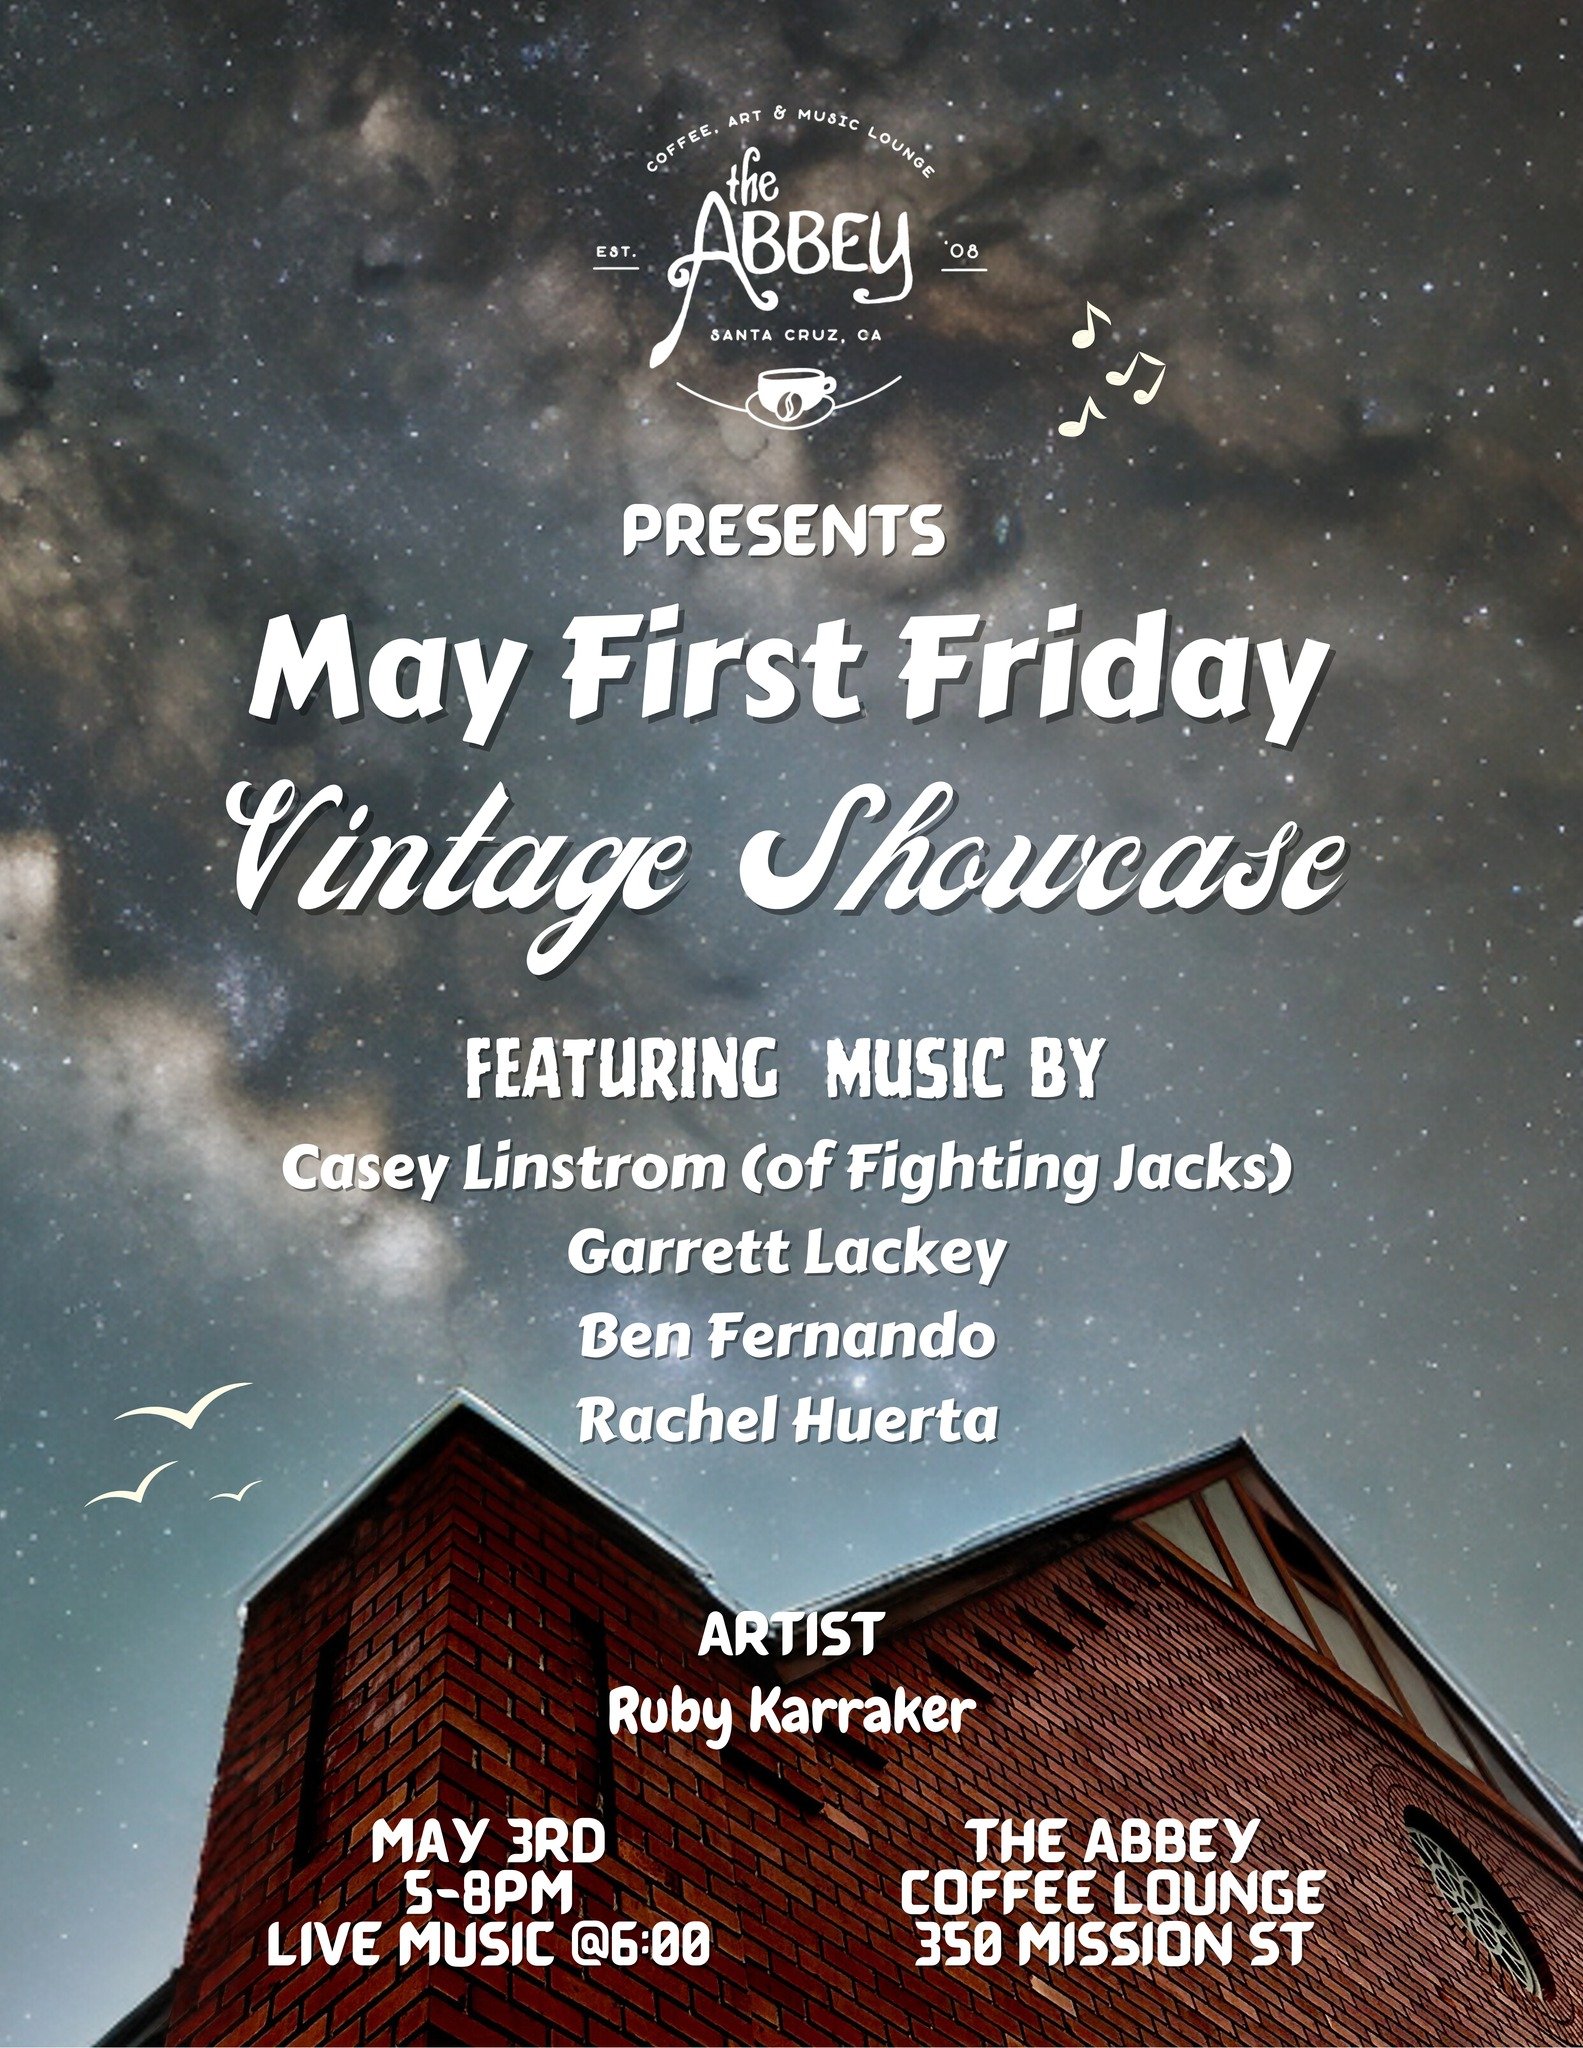 Hey Y'all- we have a special First Friday for May, a Vintage showcase with one of our  Baristas playing as well! Come out and support 5/3 from 5-8PM. See you all there!!!
#theabbeysc #UCSC #downtownsantacruz #firstfridaysantacruz